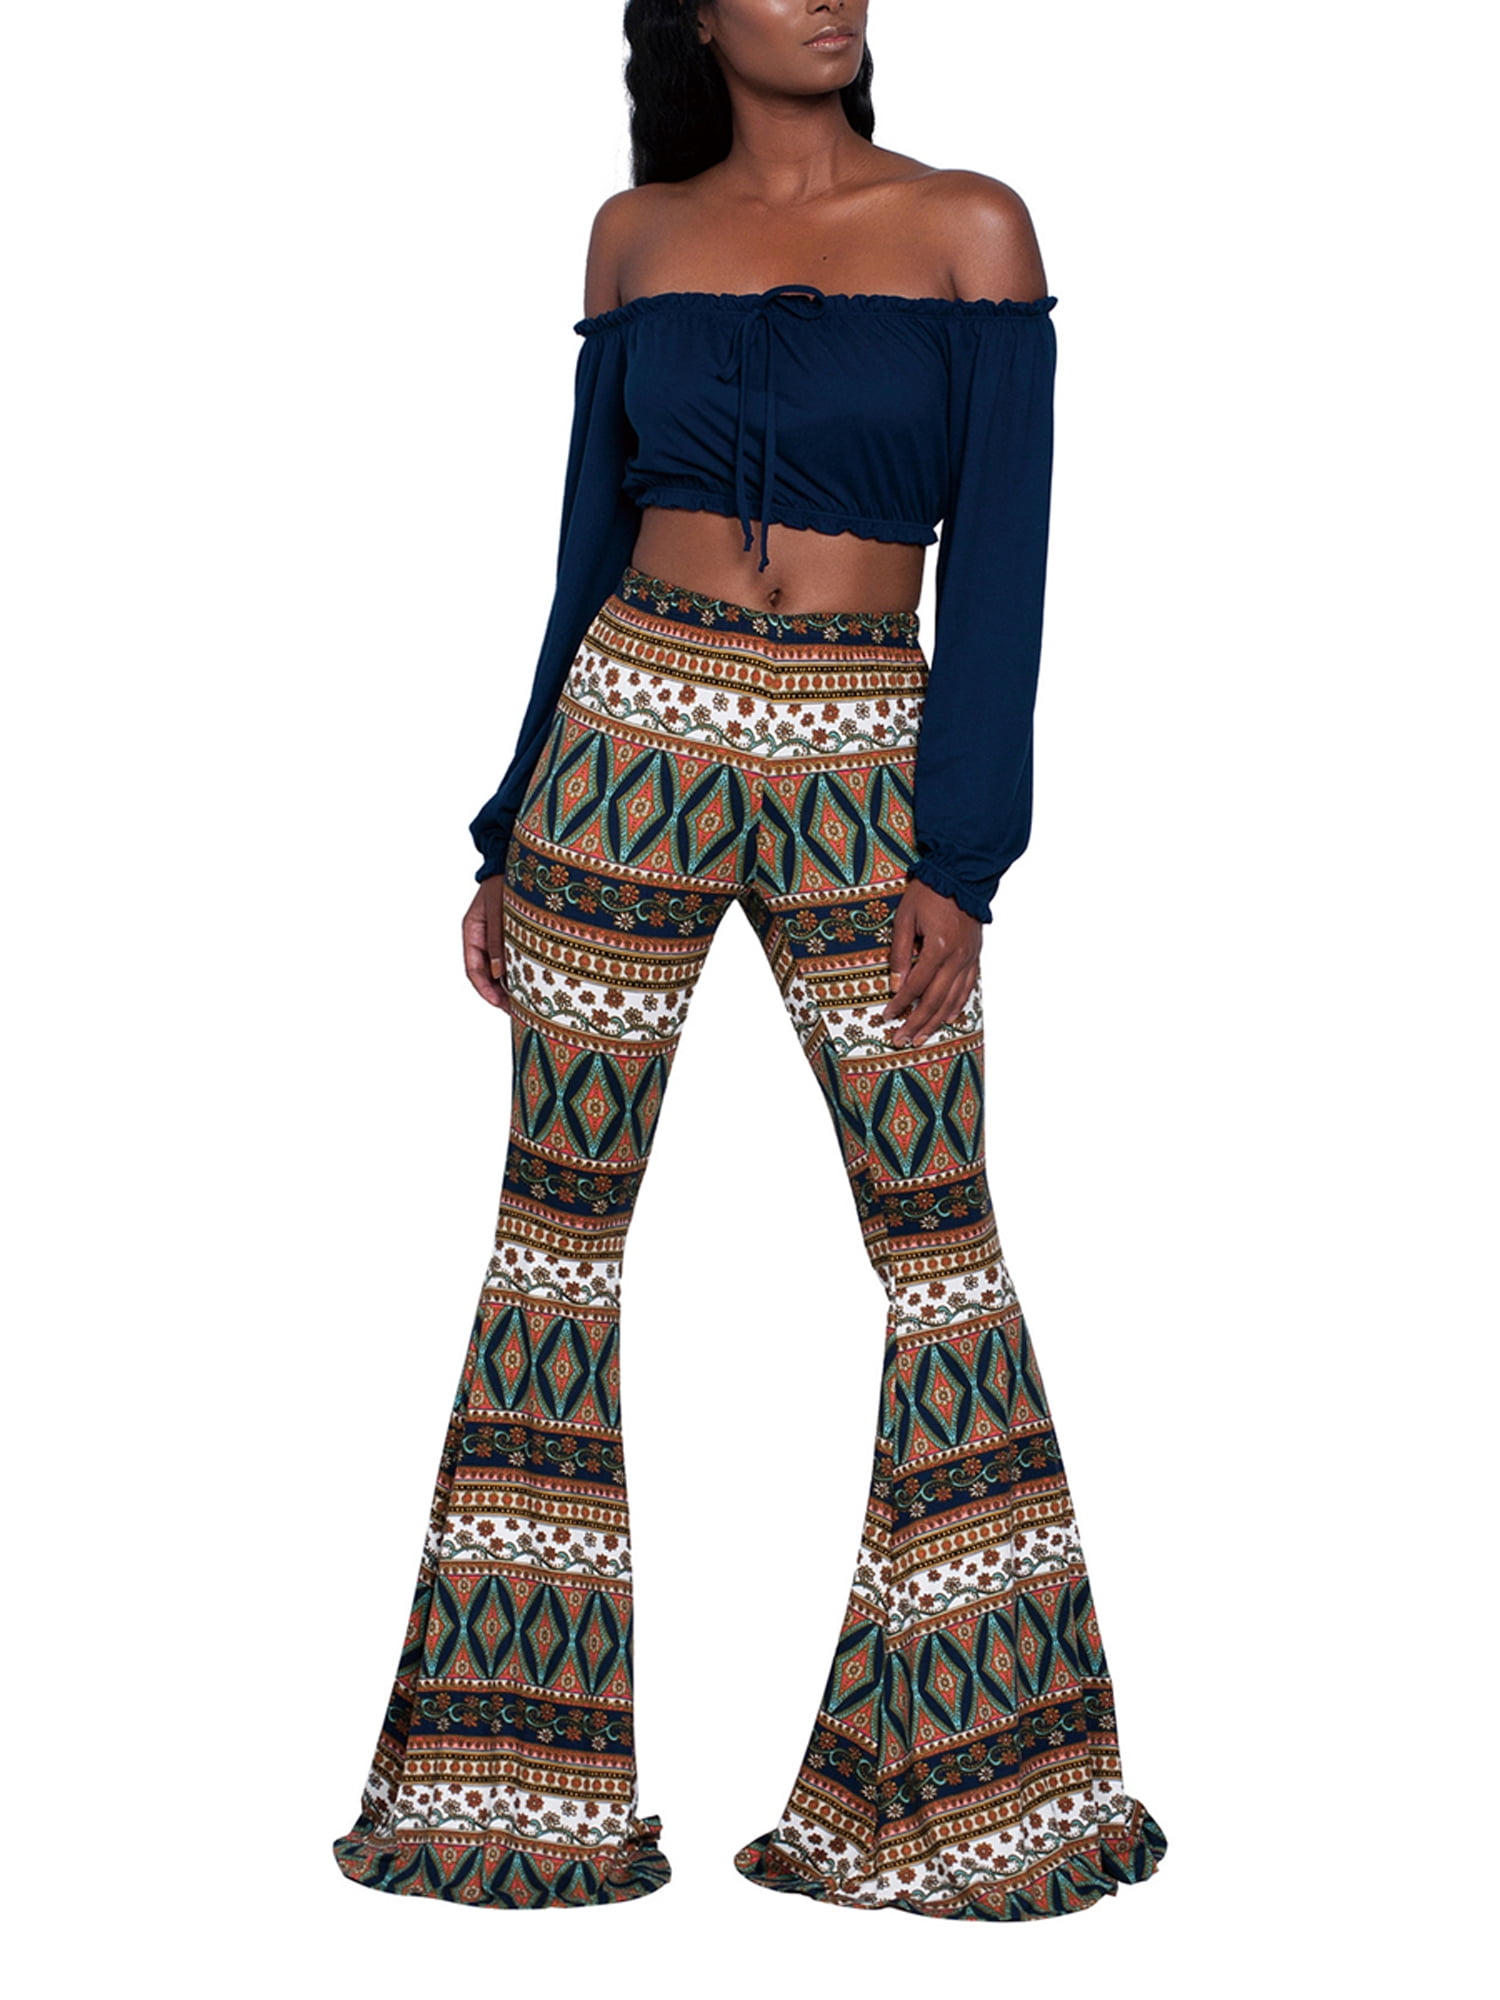 SWEETKIE Boho Flare Pants, Elastic Waist, Wide Leg Pants for Women, Solid &  Printed, Stretchy and Soft